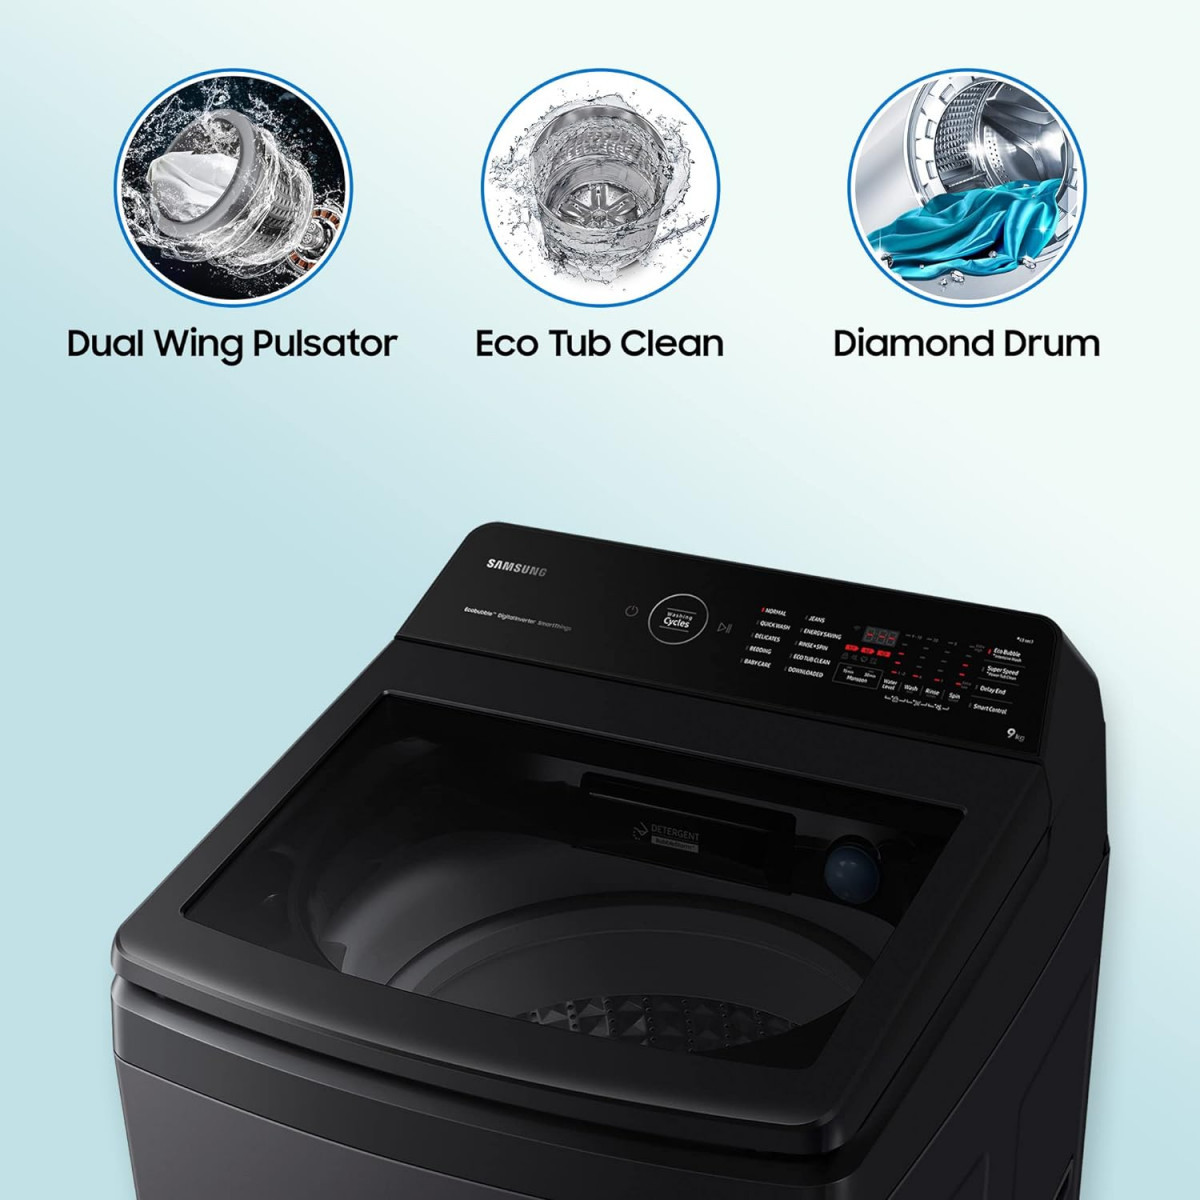 Samsung 9 Kg 5 Star Eco Bubble Technology With Super Speed Wi-Fi Digital Inverter Motor Dual Storm Fully-Automatic Top Load Washing Machine WA90BG4546BVTL Black Caviar